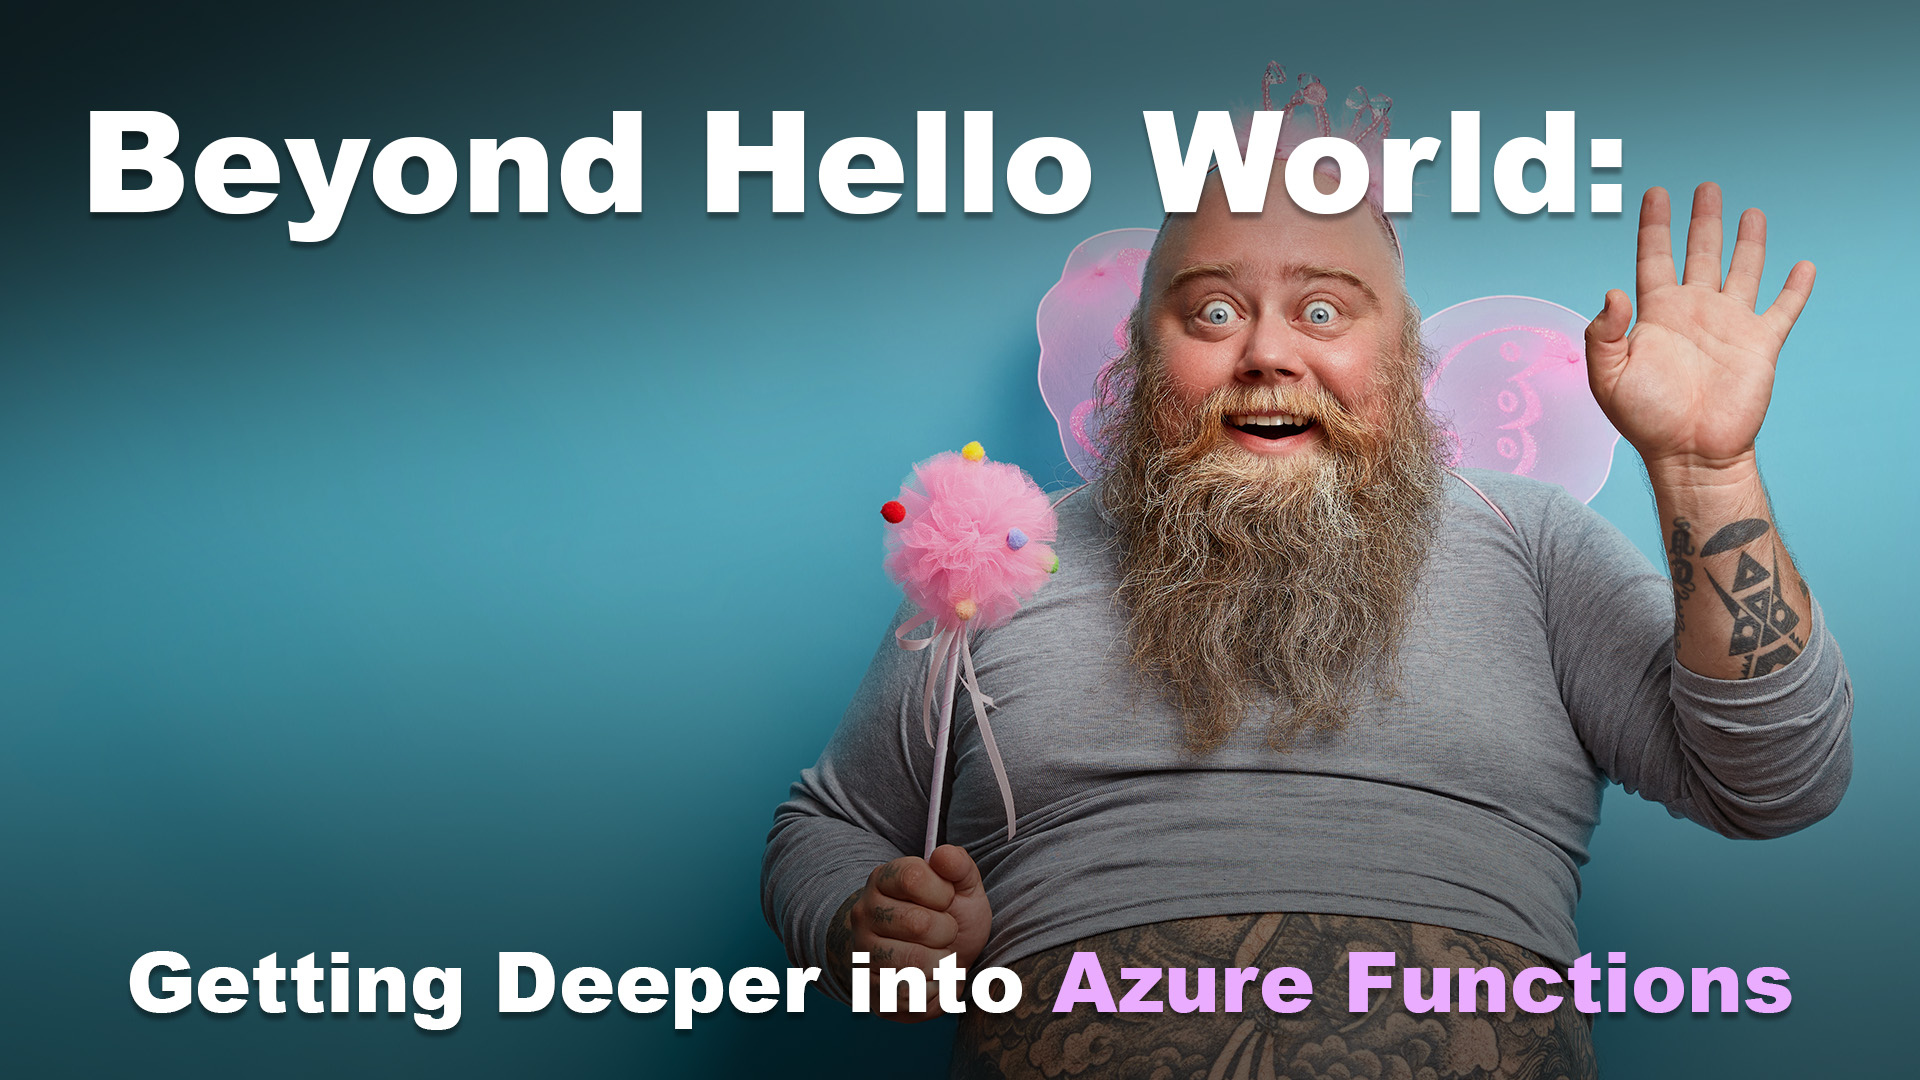 Beyond Hello World: Getting Deeper into Azure Functions